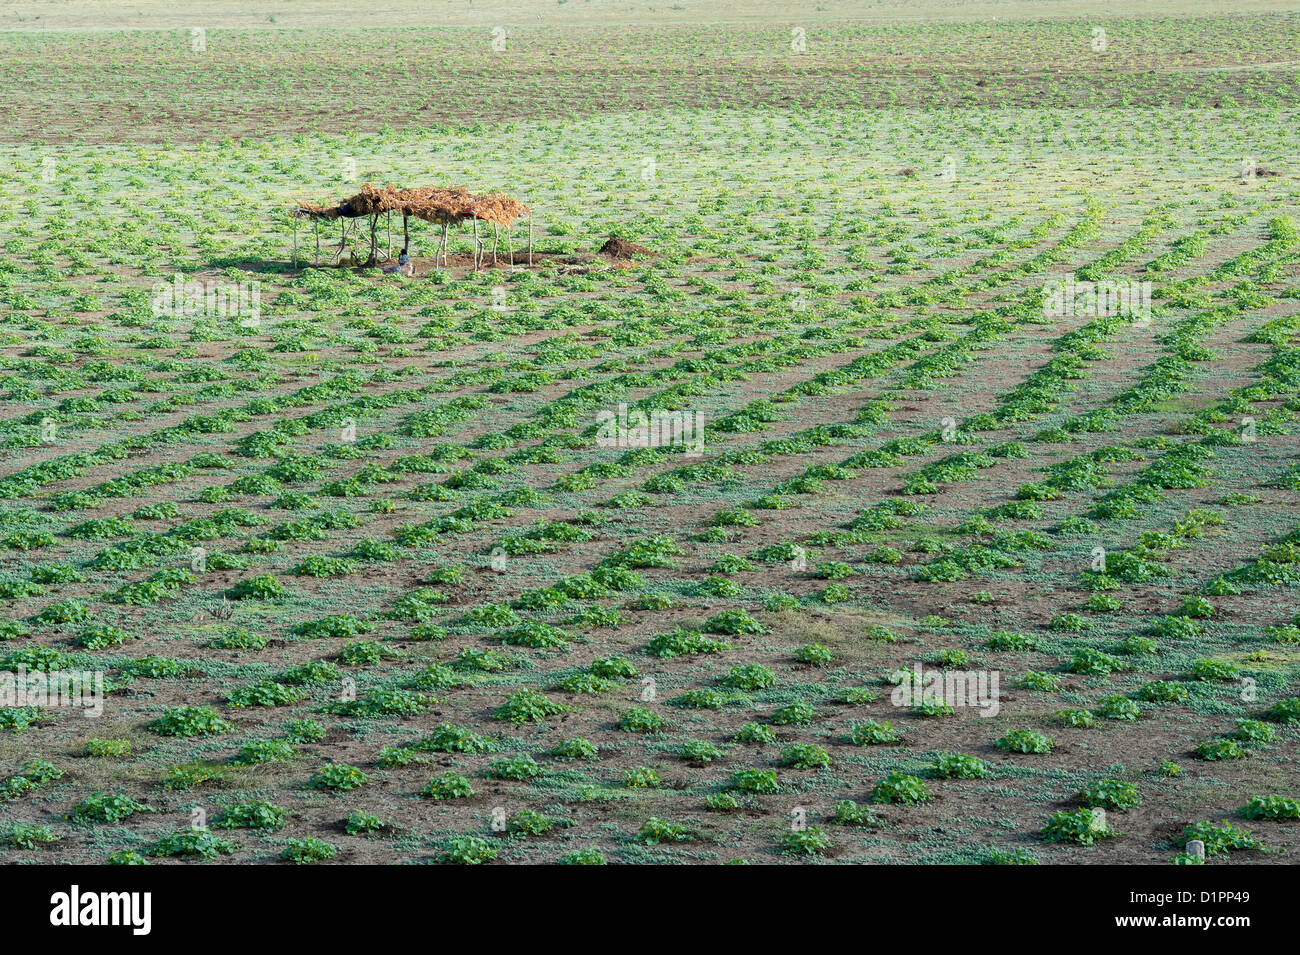 Citrullus lanatus. Watermelon plants planted in a dried up lake in the indian countryside. Andhra Pradesh, India Stock Photo